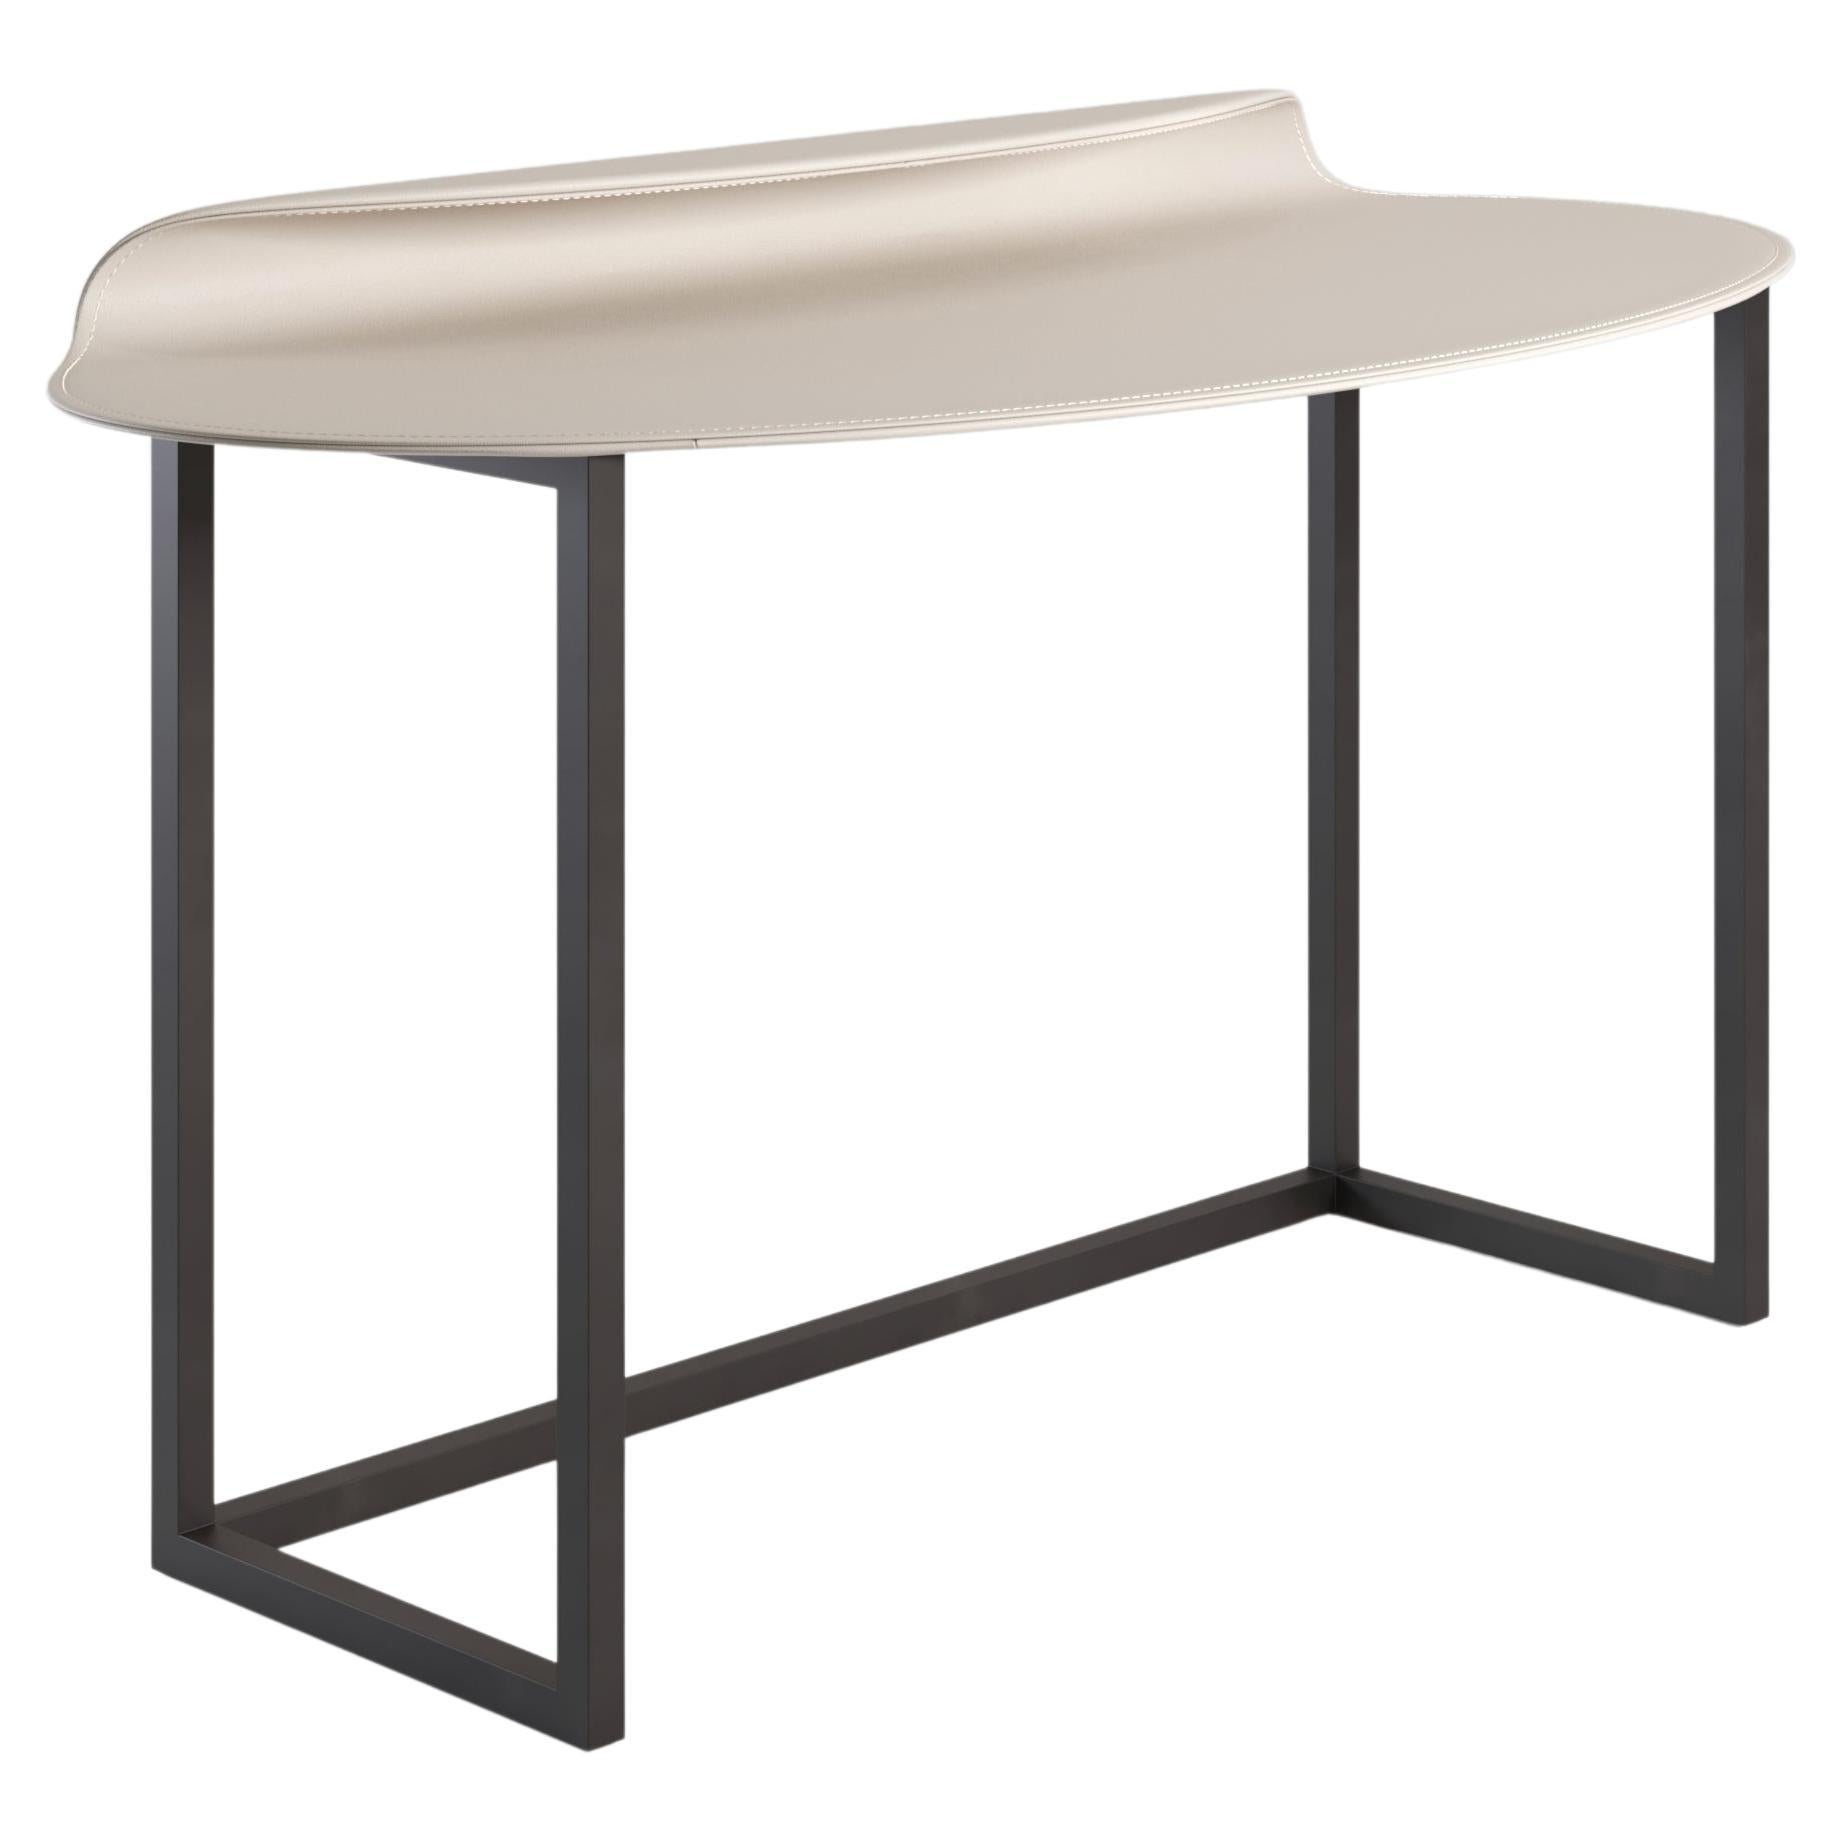 Nakamura Contemporary Desk in Metal and Leather